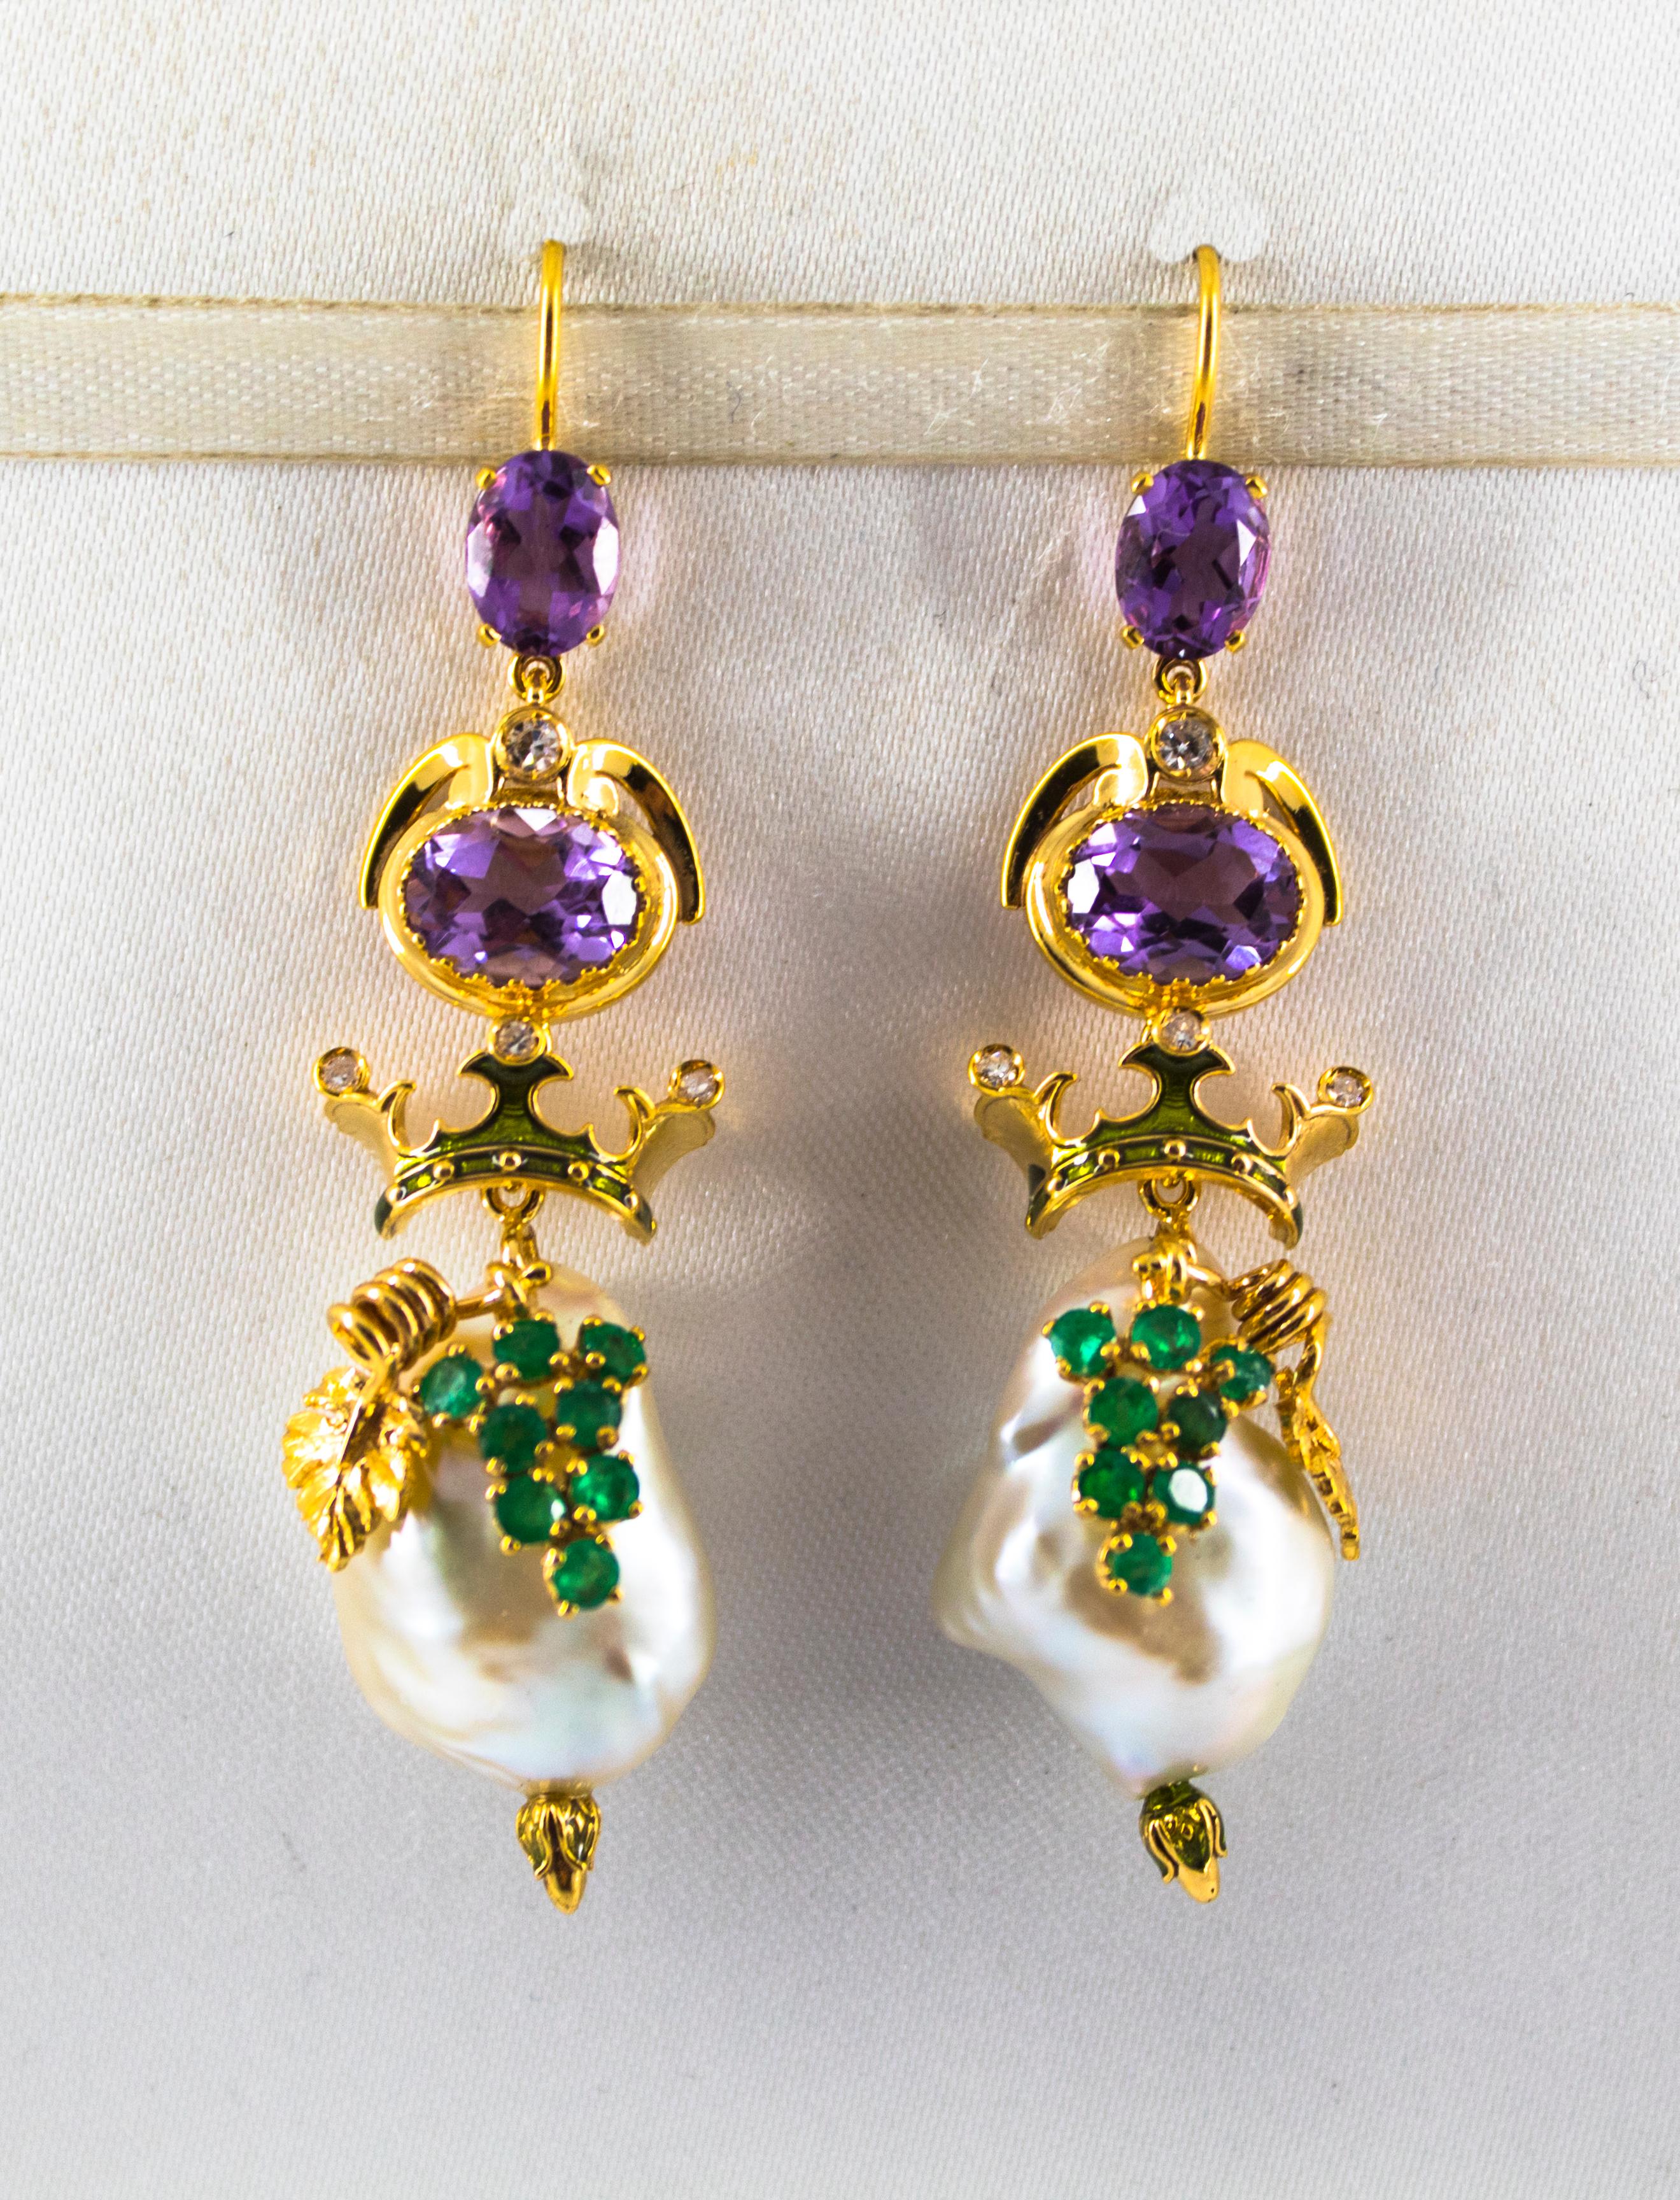 These Stud Earrings are made of 14K Yellow Gold.
These Earrings have 0.16 Carats of White Brilliant Cut Diamonds.
These Earrings have 0.90 Carats of Emeralds.
These Earrings have 1.80 Carats of Amethyst.
These Earrings have also Pearls and